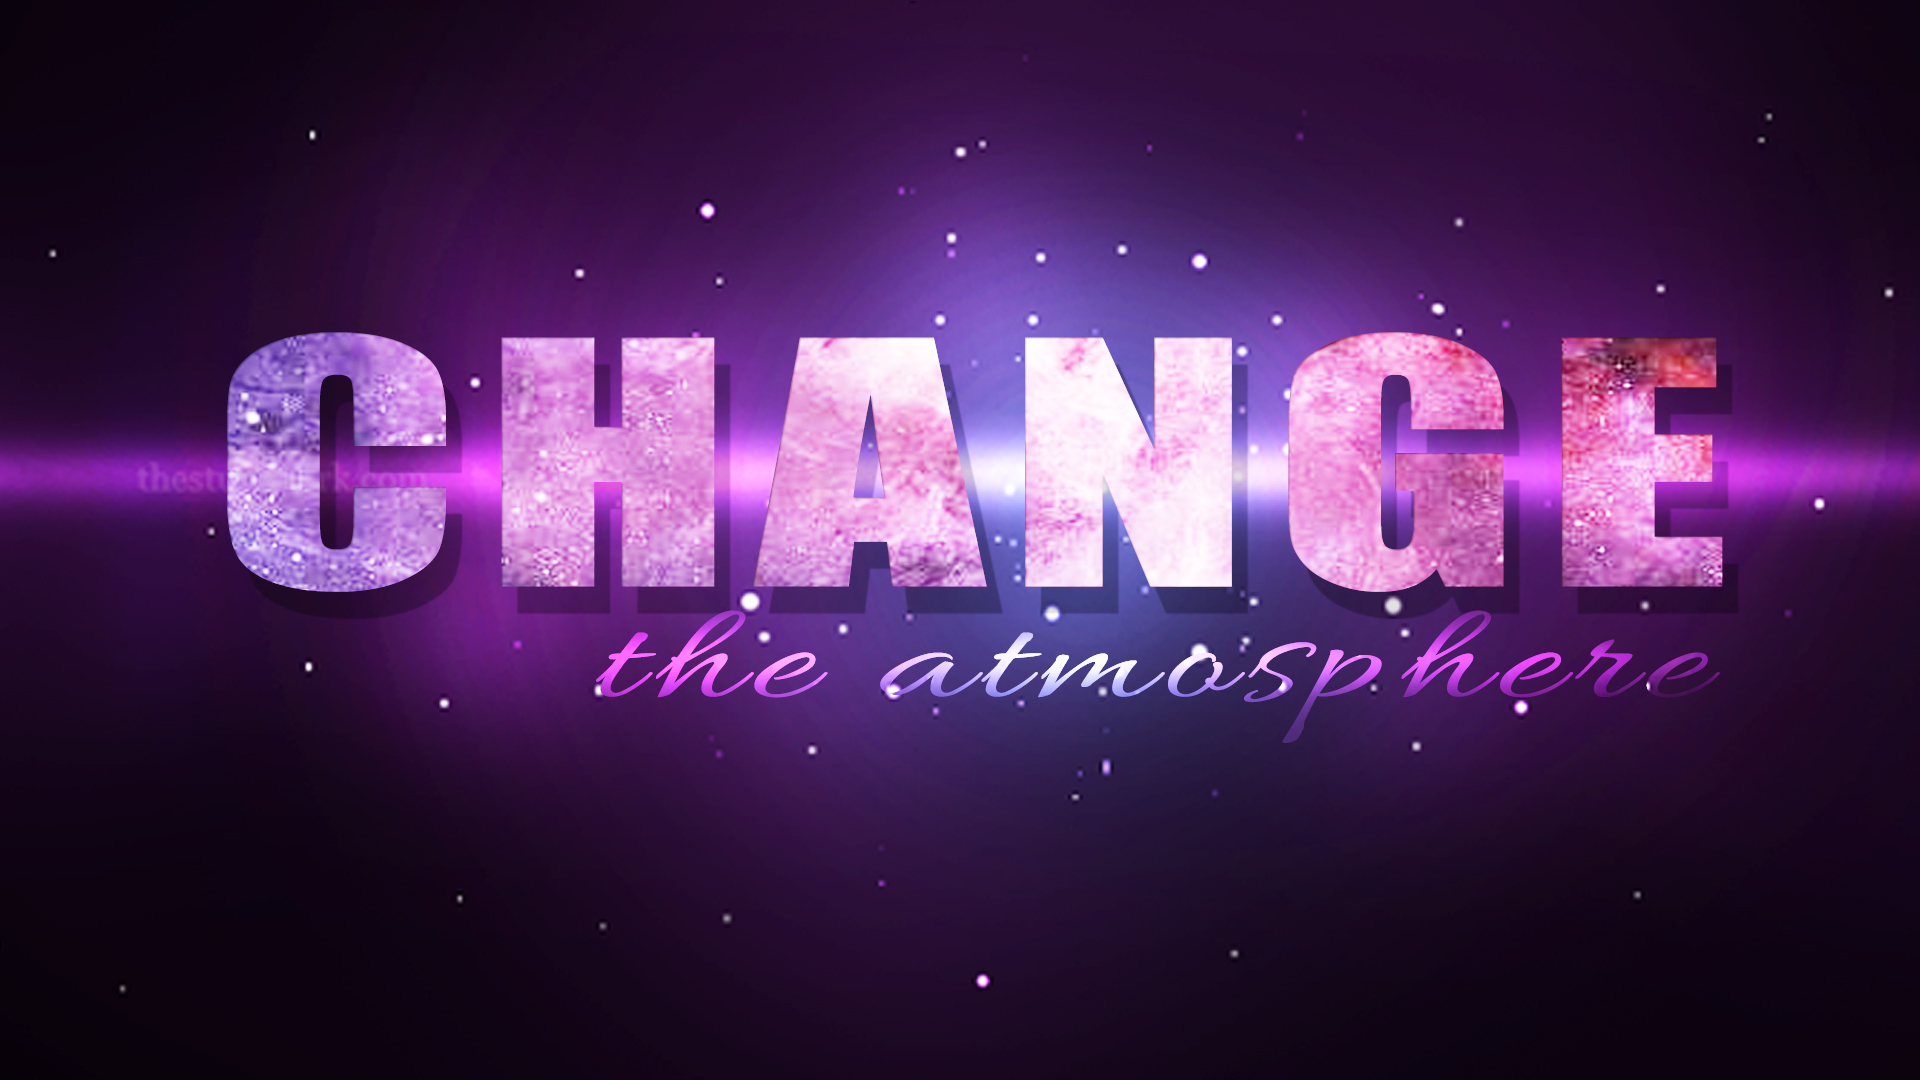 Change the Atmosphere - 05/28/17